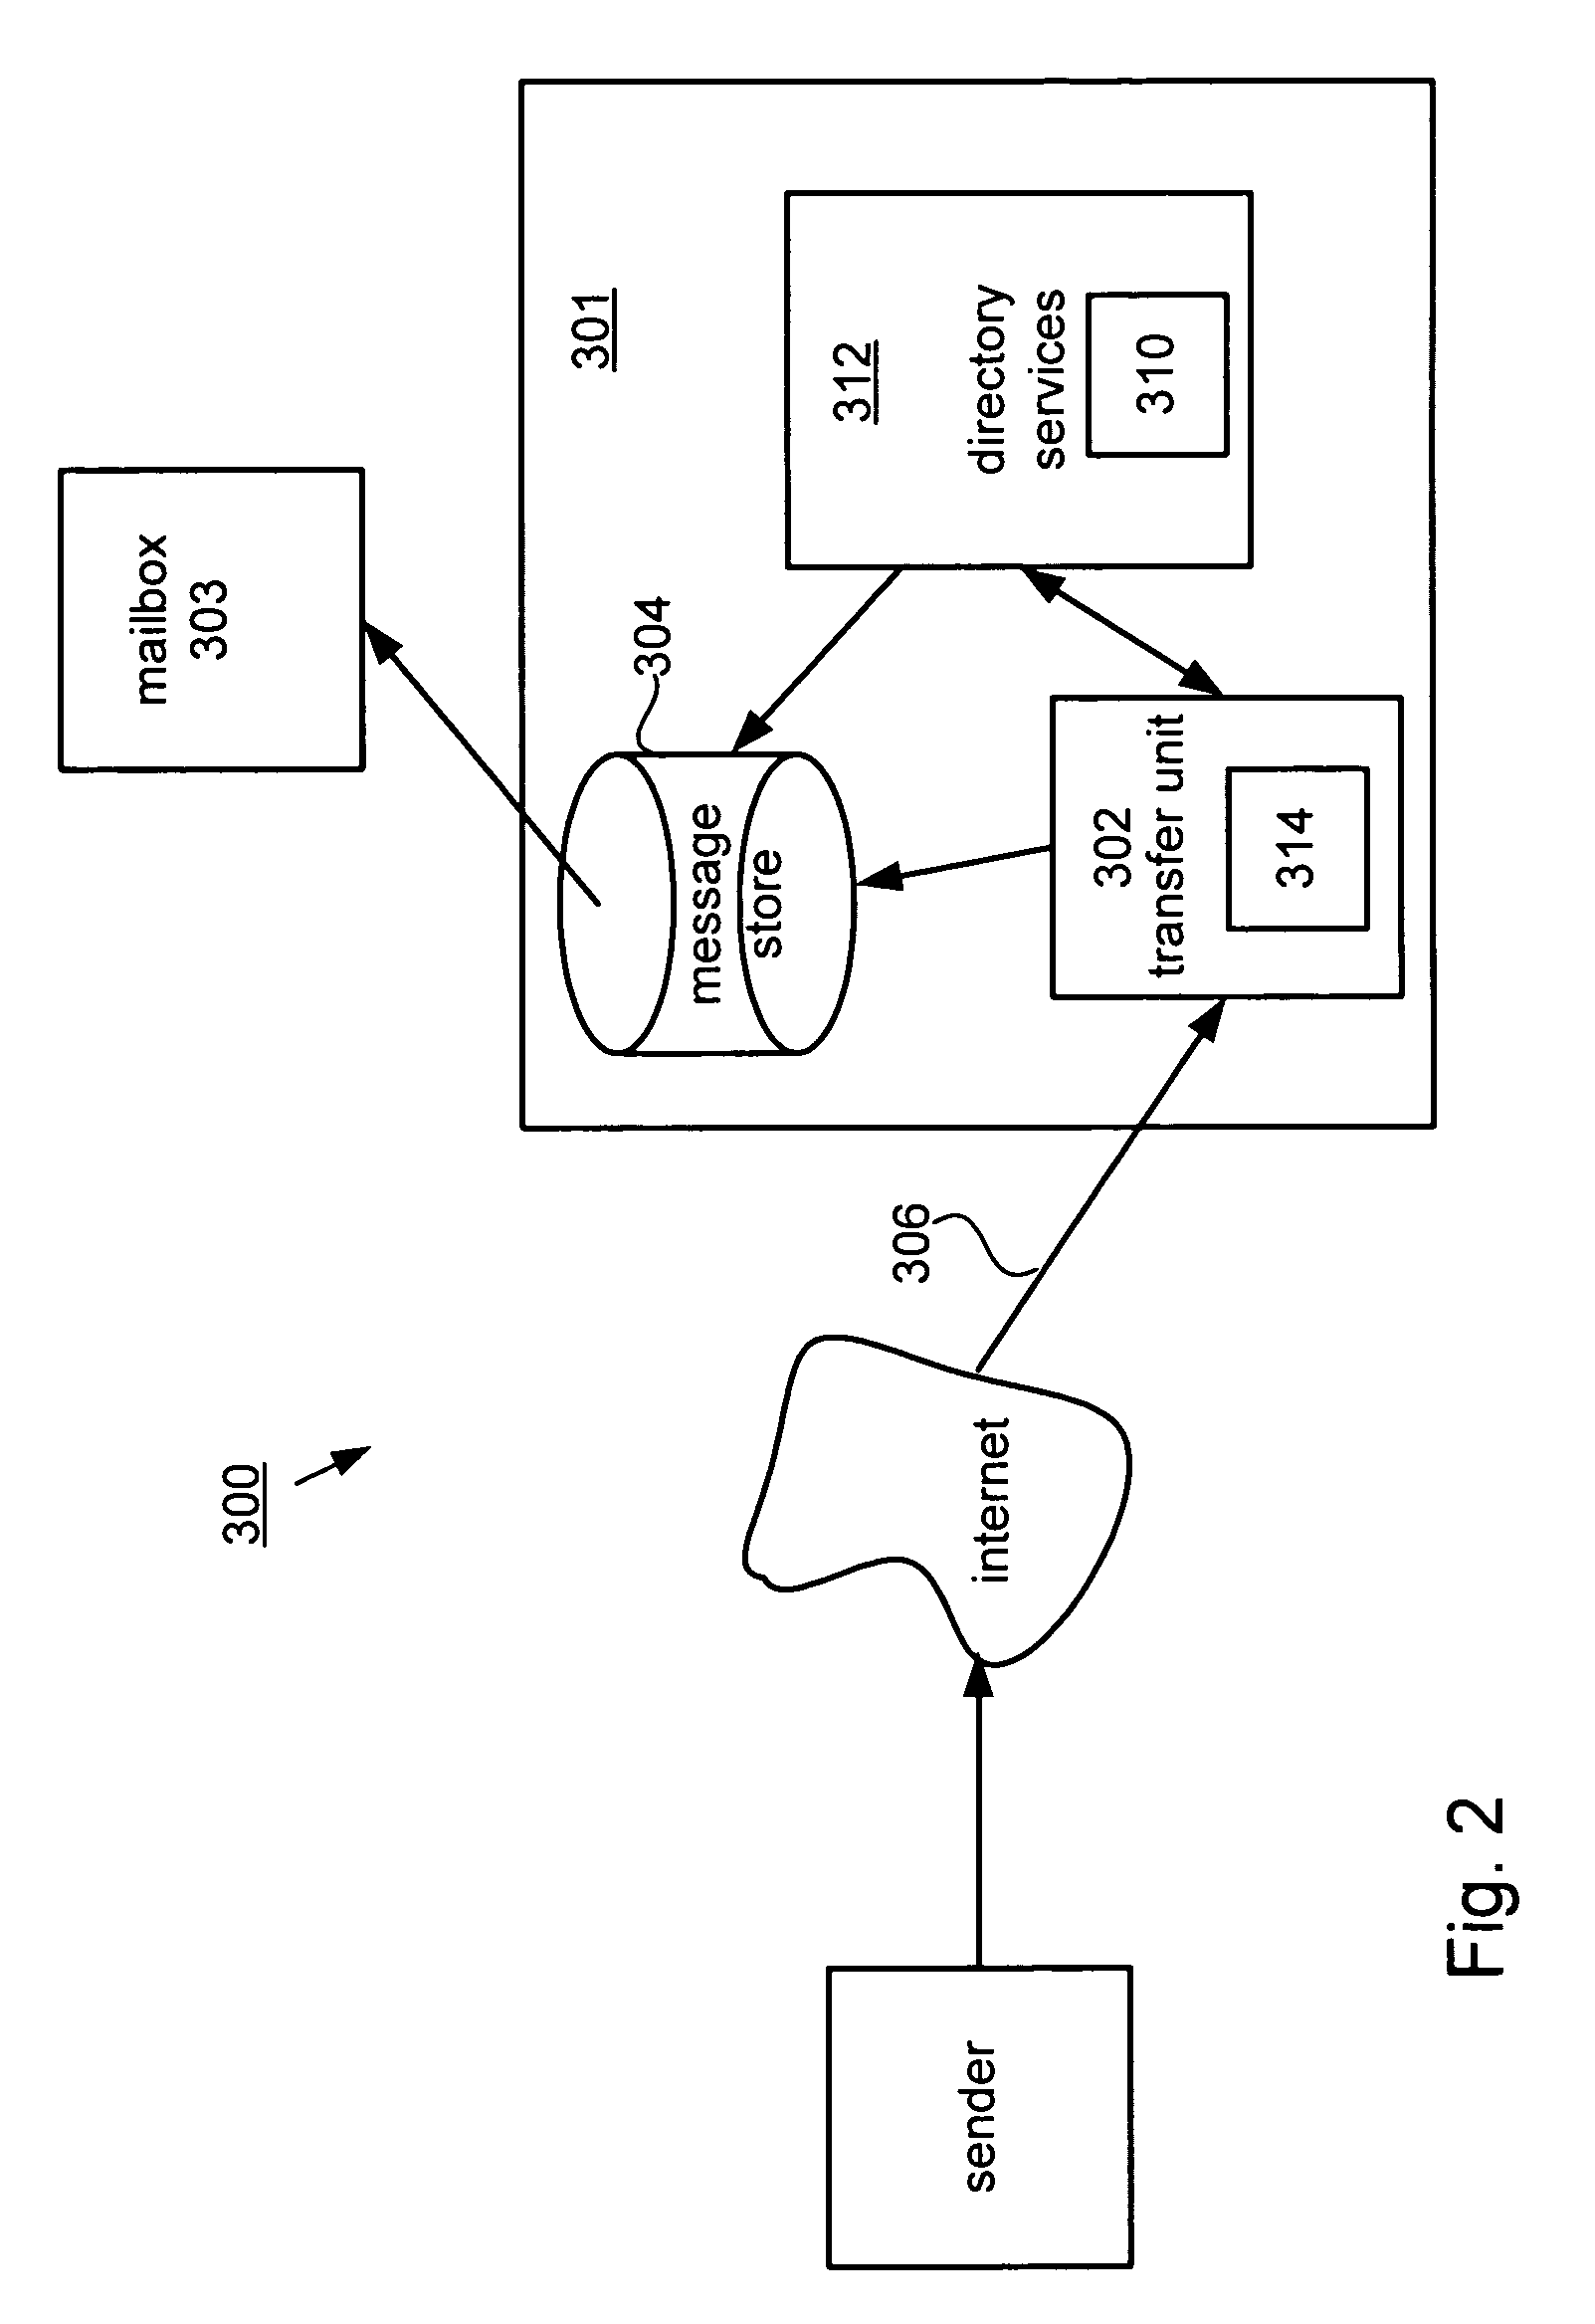 Methods and apparatus for providing a virtual host in electronic messaging servers